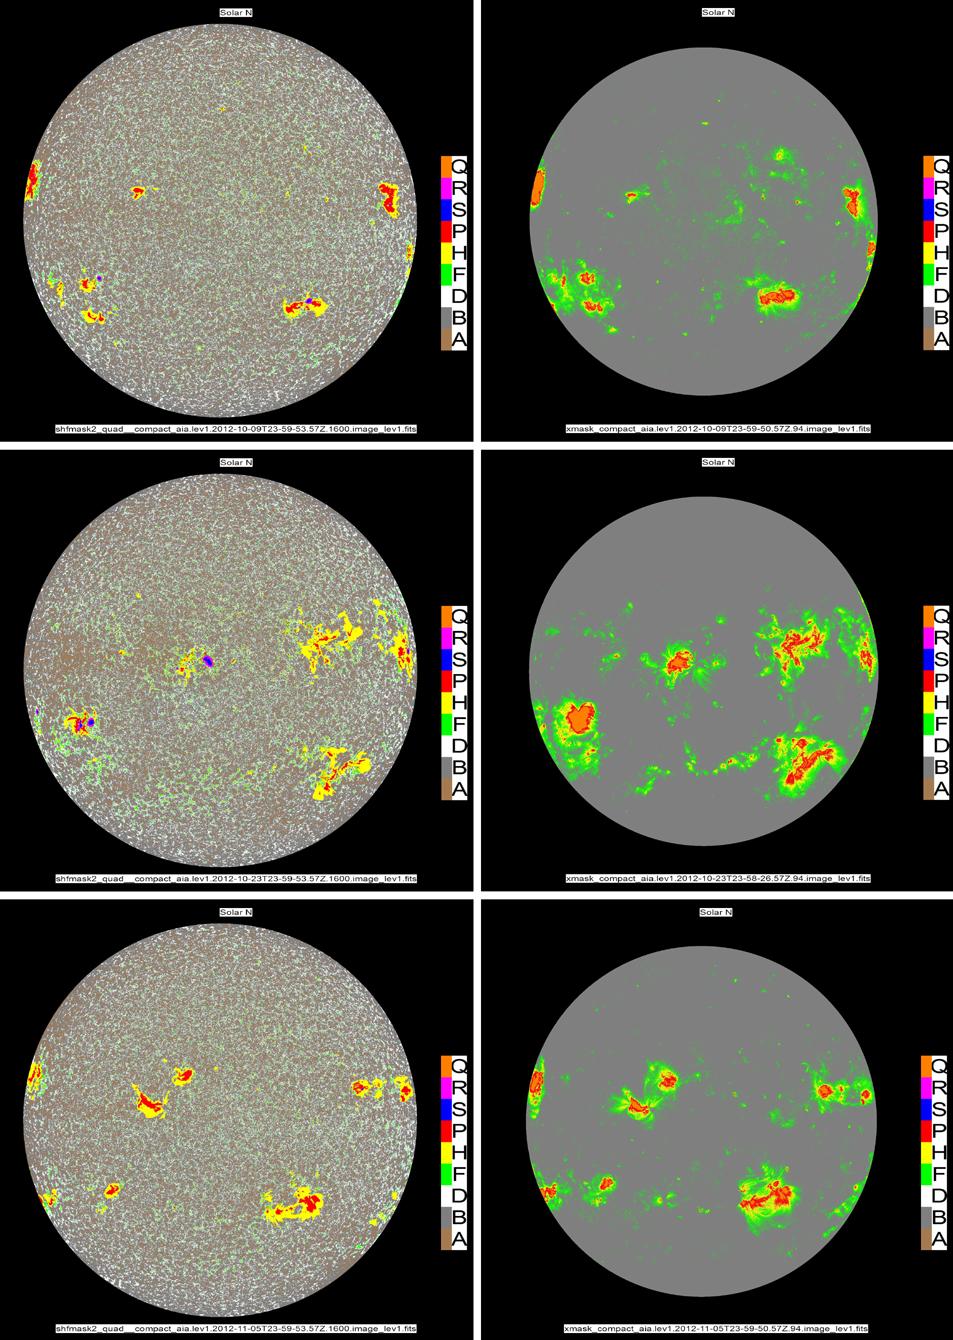 542 J.M. Fontenla et al. Figure 18 Image masks showing the features detected in the solar disk according to our classification in Table 1 and the SDO/AIA images.